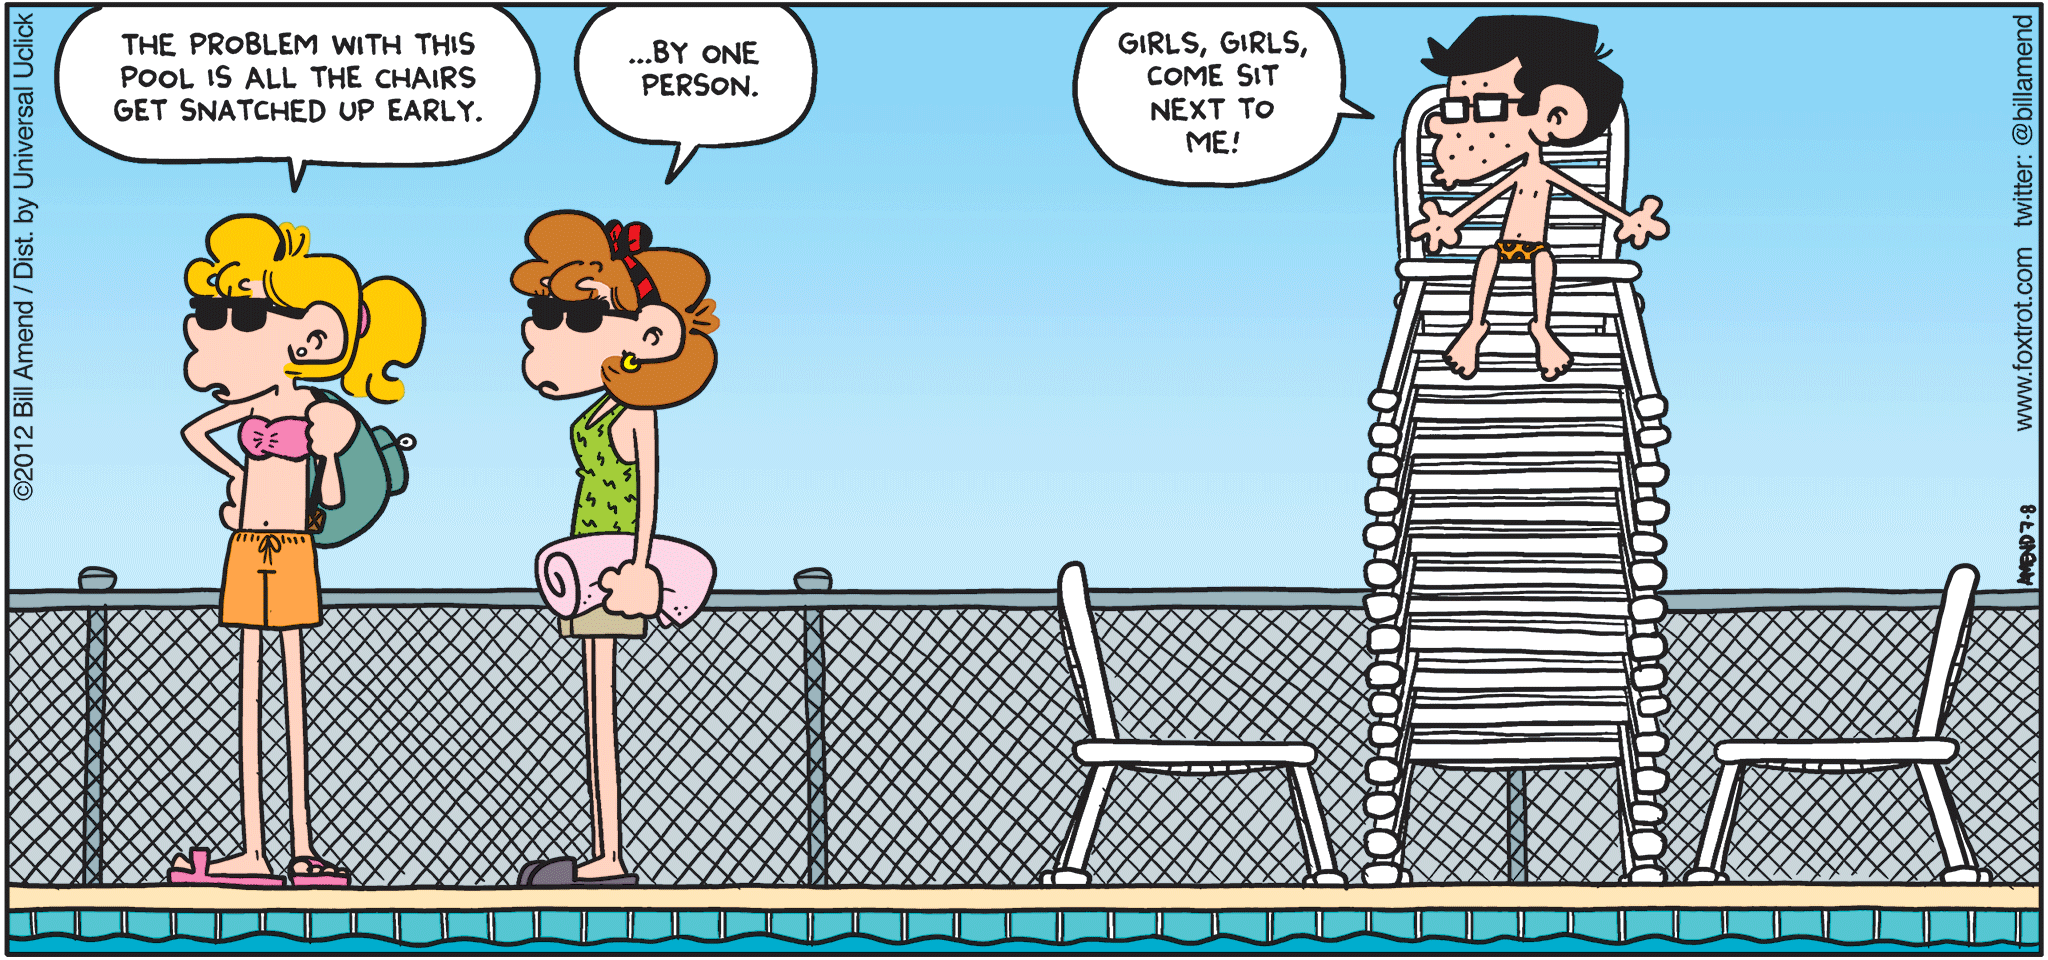 FoxTrot comic strip by Bill Amend - "Chairway to Heaven" published July 8, 2012 - Paige: The problem with this pool is all the chairs get snatched up early. Nicole: ...By one person. Morton: Girls, girls, come sit next to me!